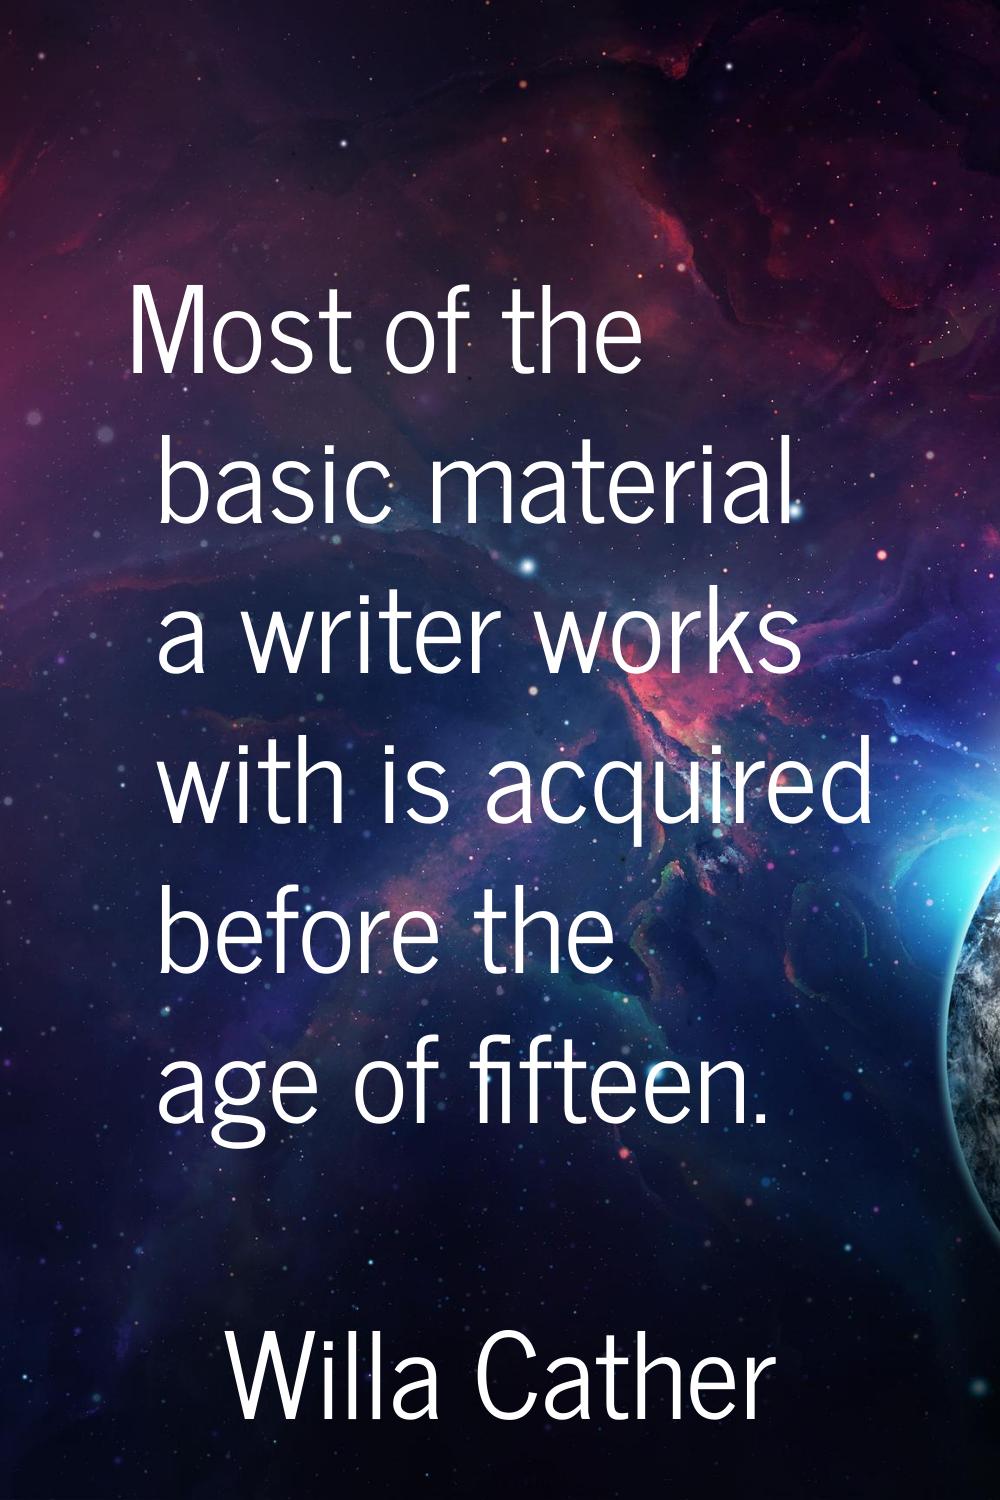 Most of the basic material a writer works with is acquired before the age of fifteen.